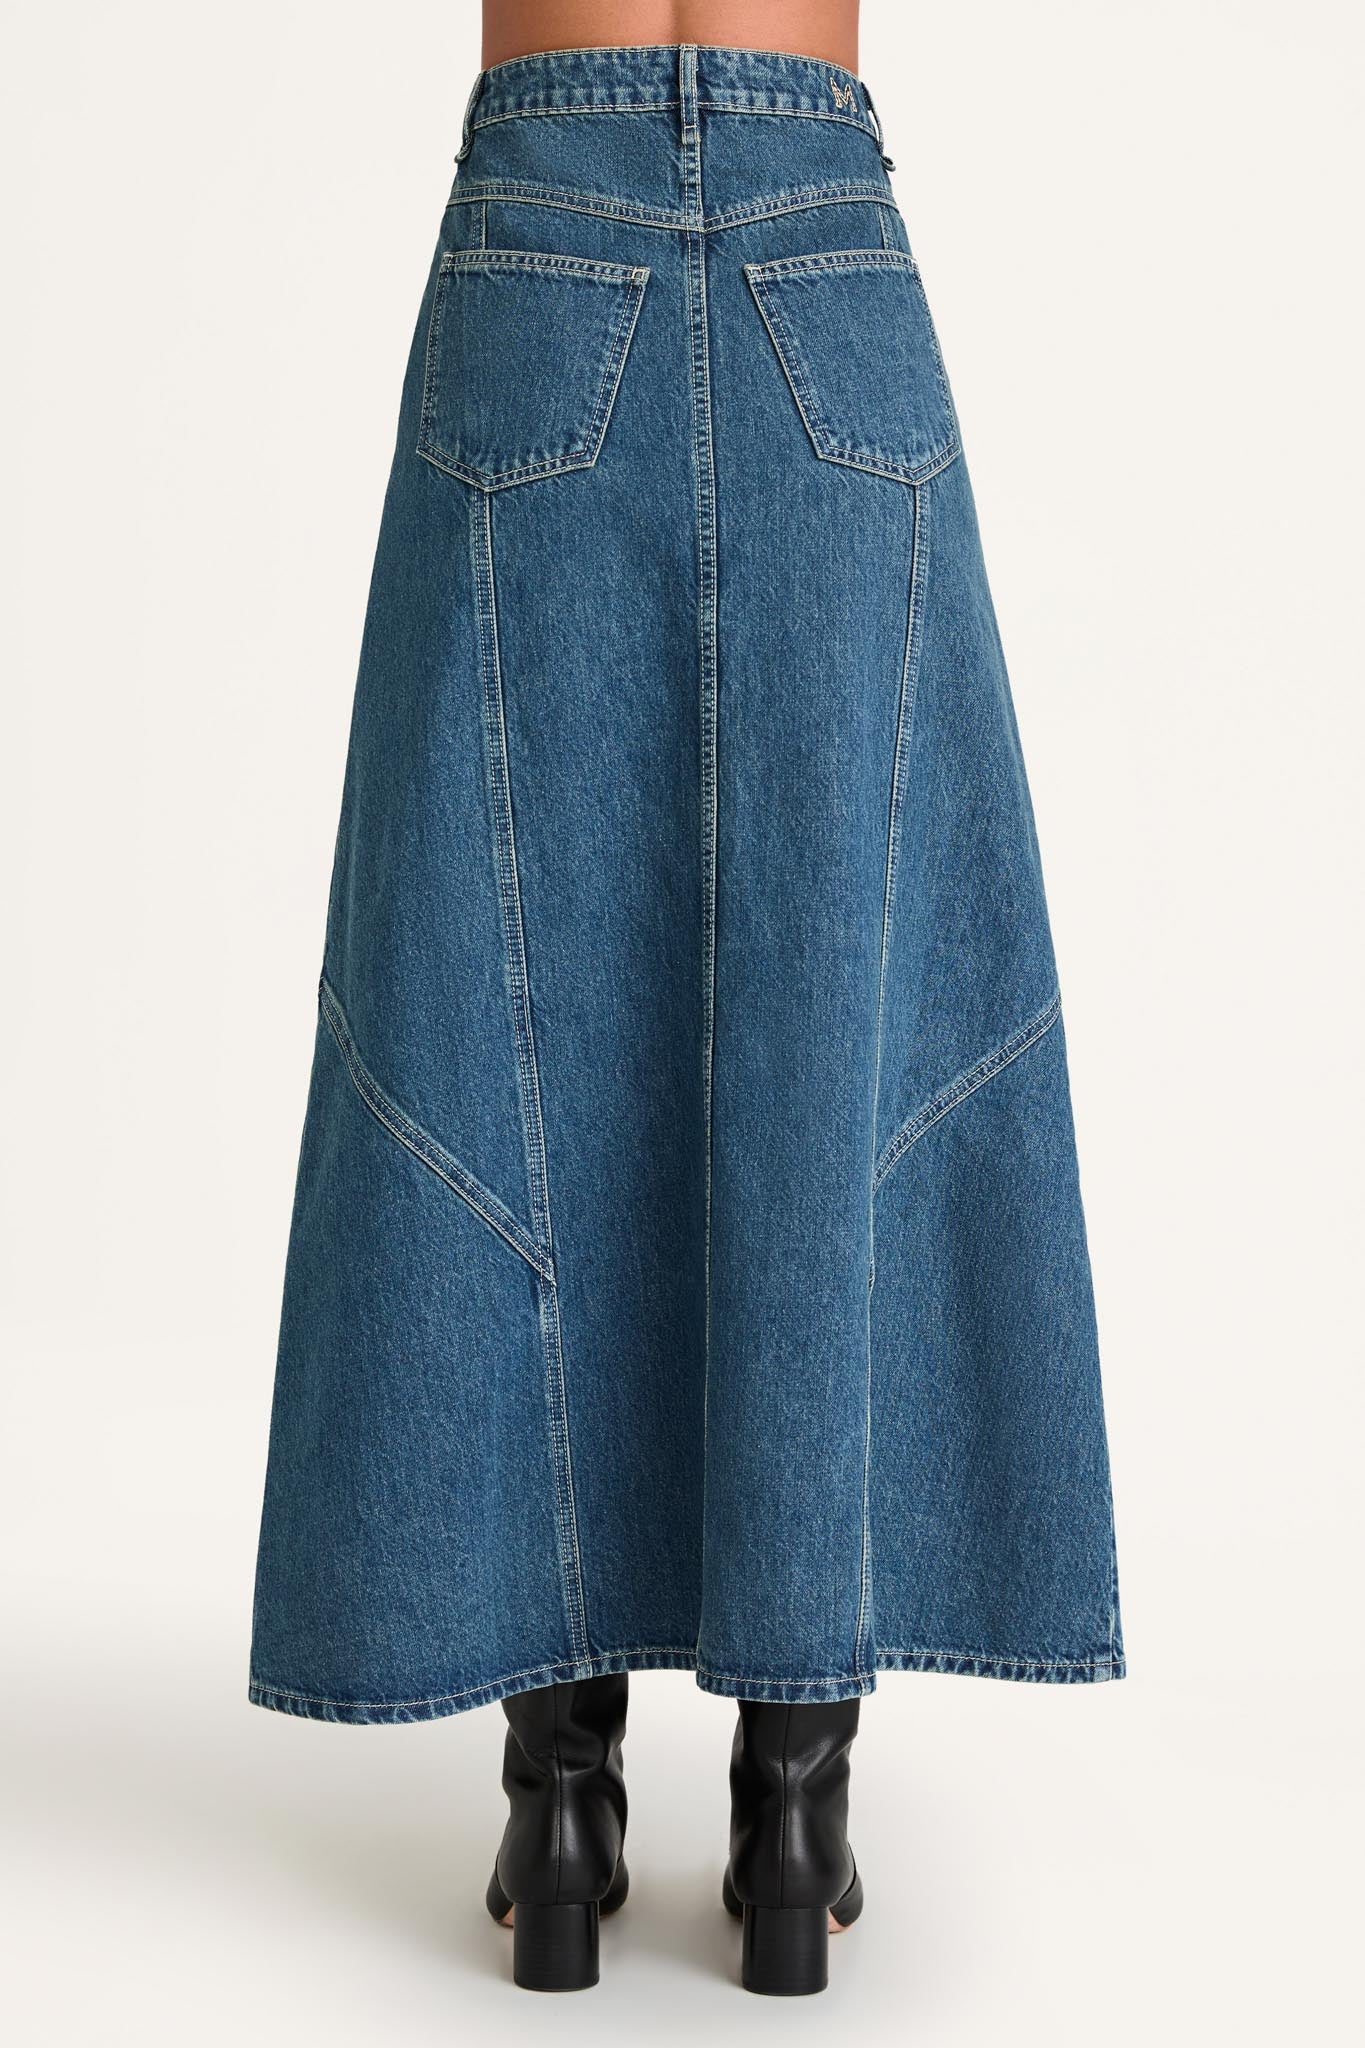 Melody Skirt in Mid-Blue Wash